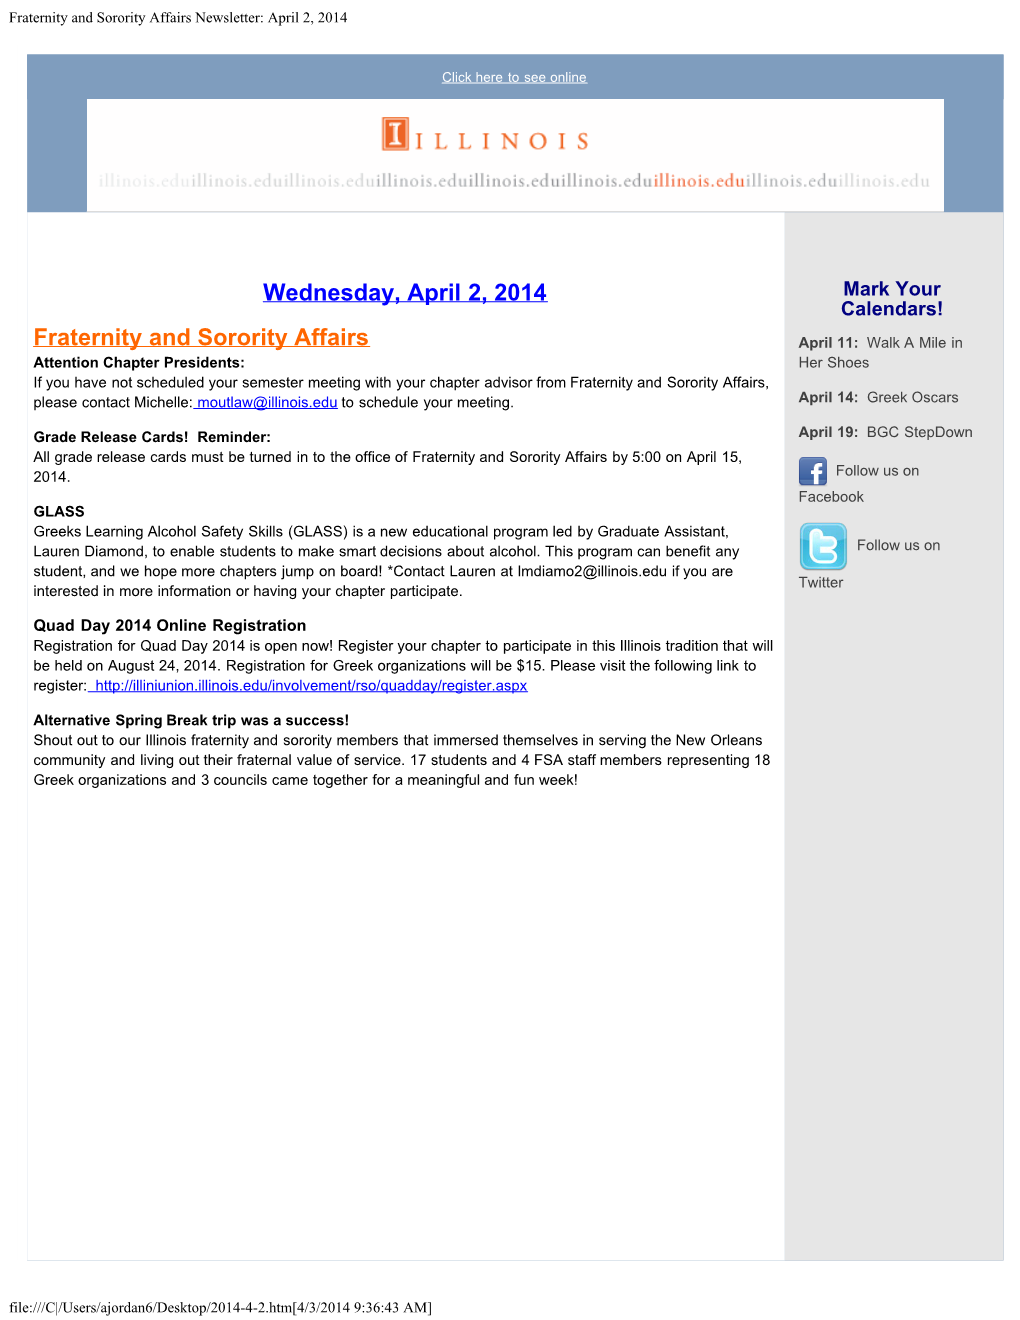 Fraternity and Sorority Affairs Newsletter: April 2, 2014